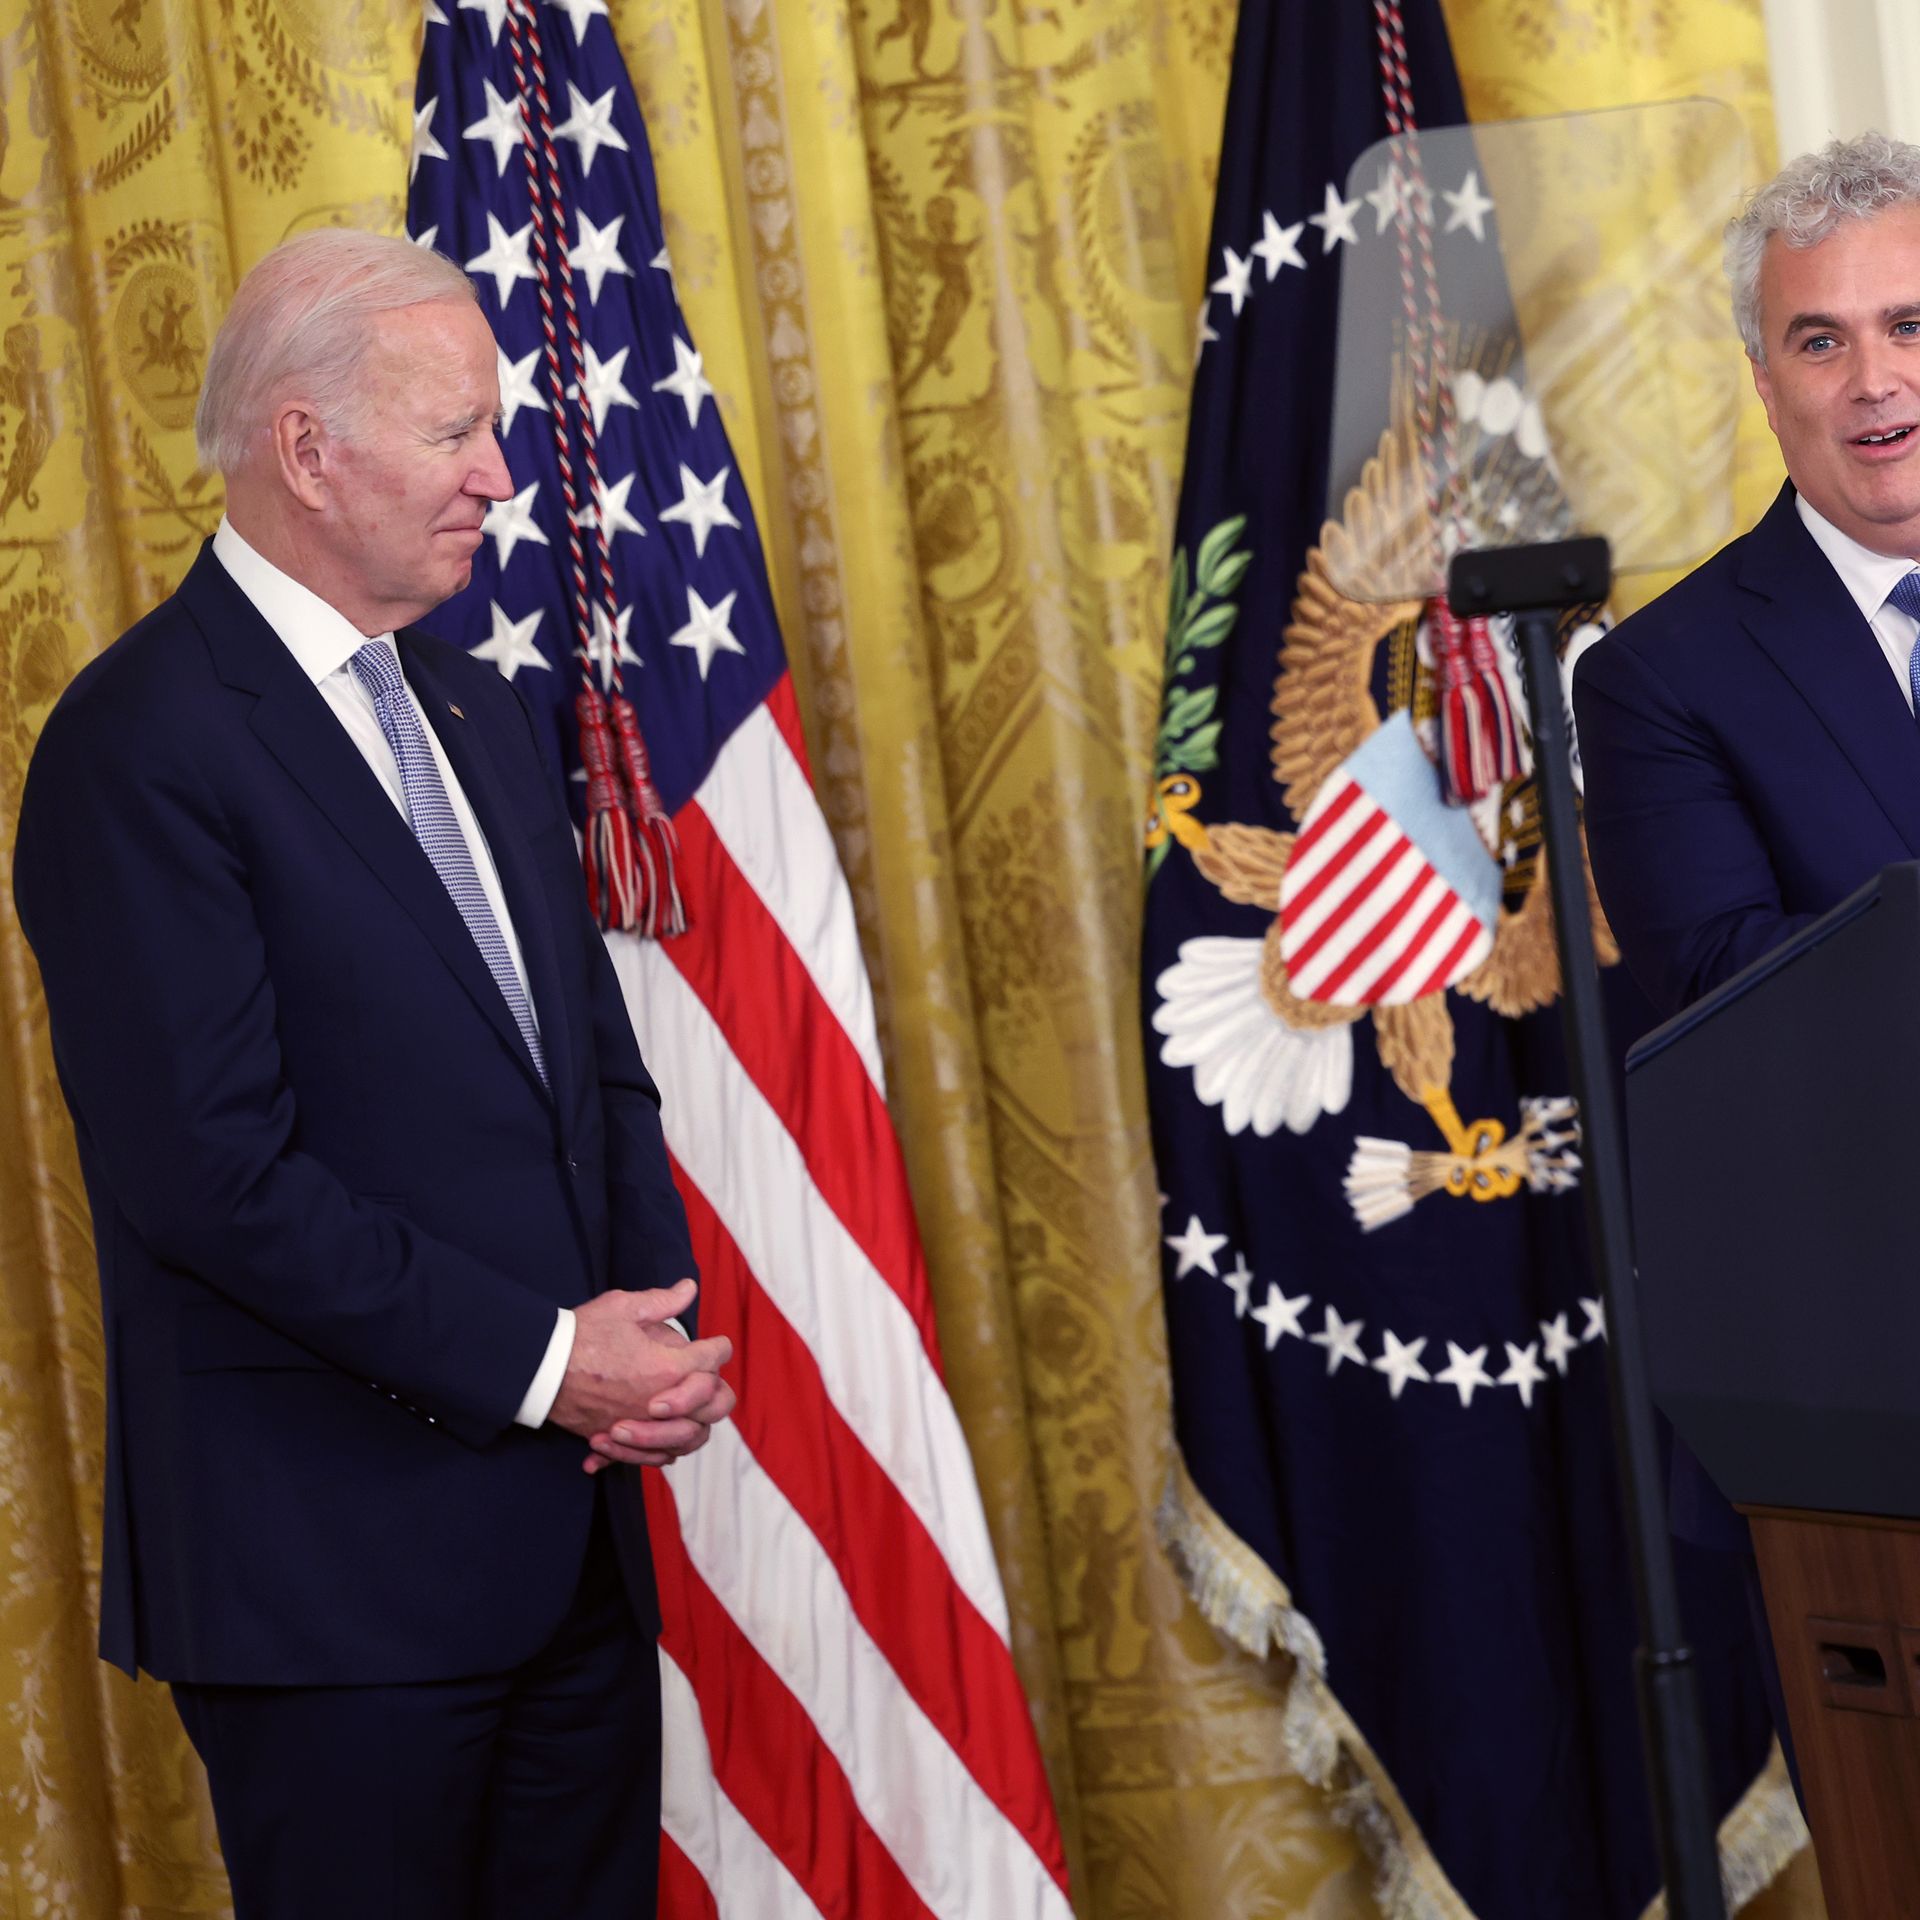 Joe Biden looks onto Jeff Zients before flags and the golden drapes of the east room of the White House